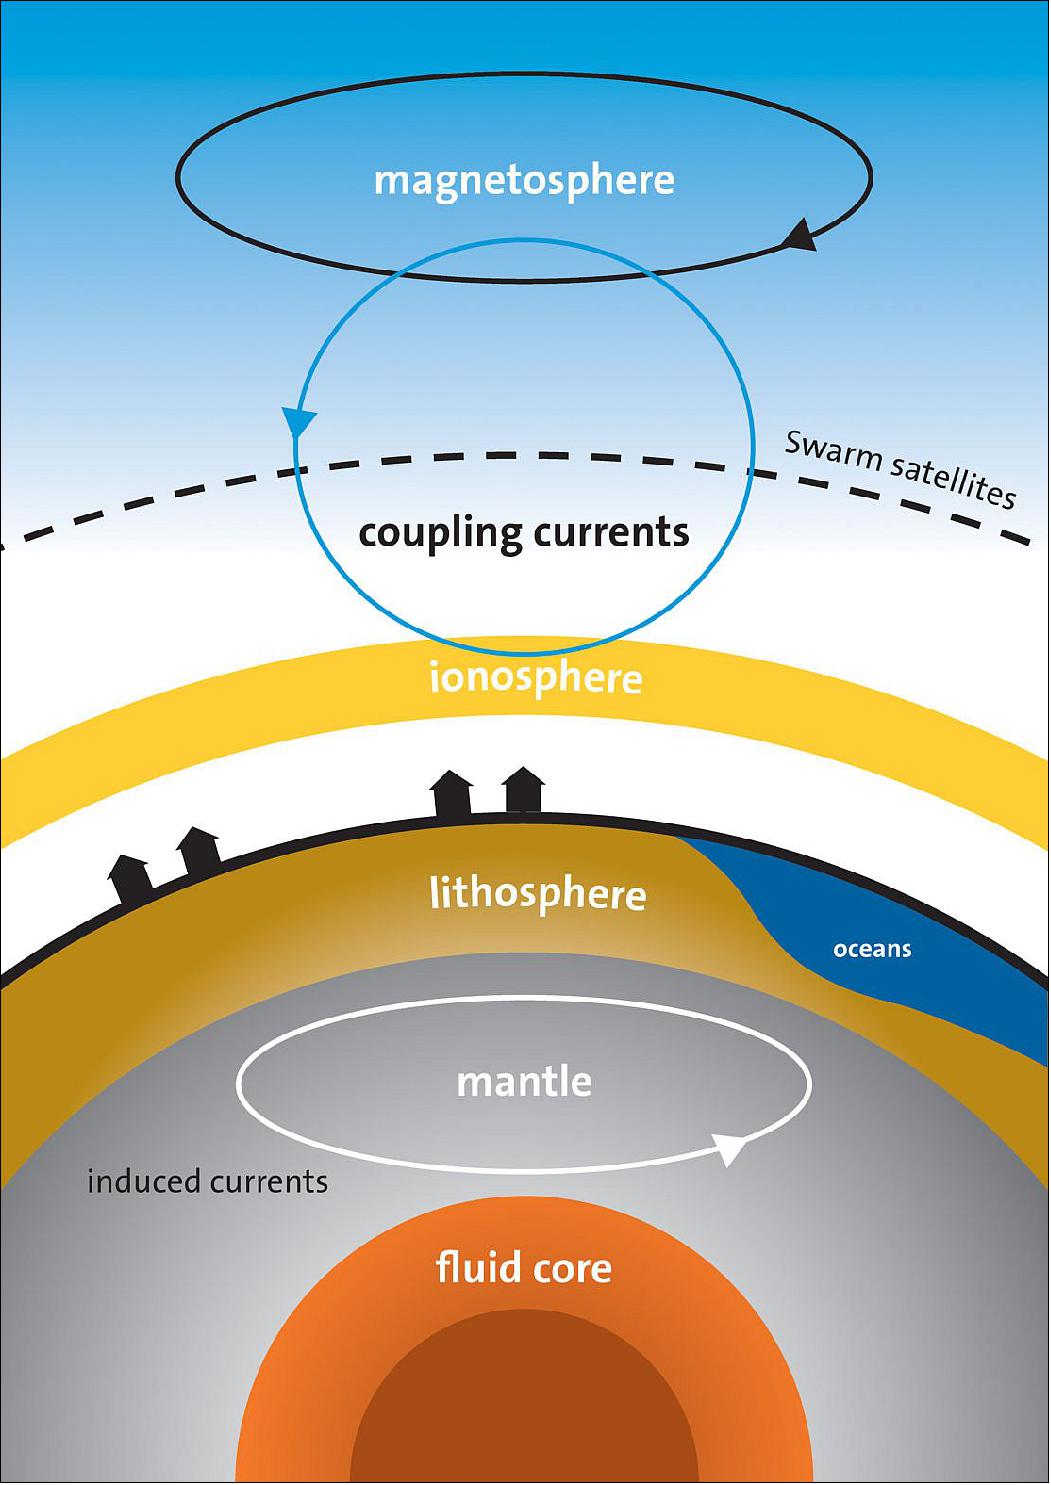 Figure 105: Magnetic field sources: The different sources that contribute to the magnetic field measured by Swarm. The coupling currents or field-aligned currents flow along magnetic field lines between the magnetosphere and ionosphere (image credit: ESA, DTU Space)